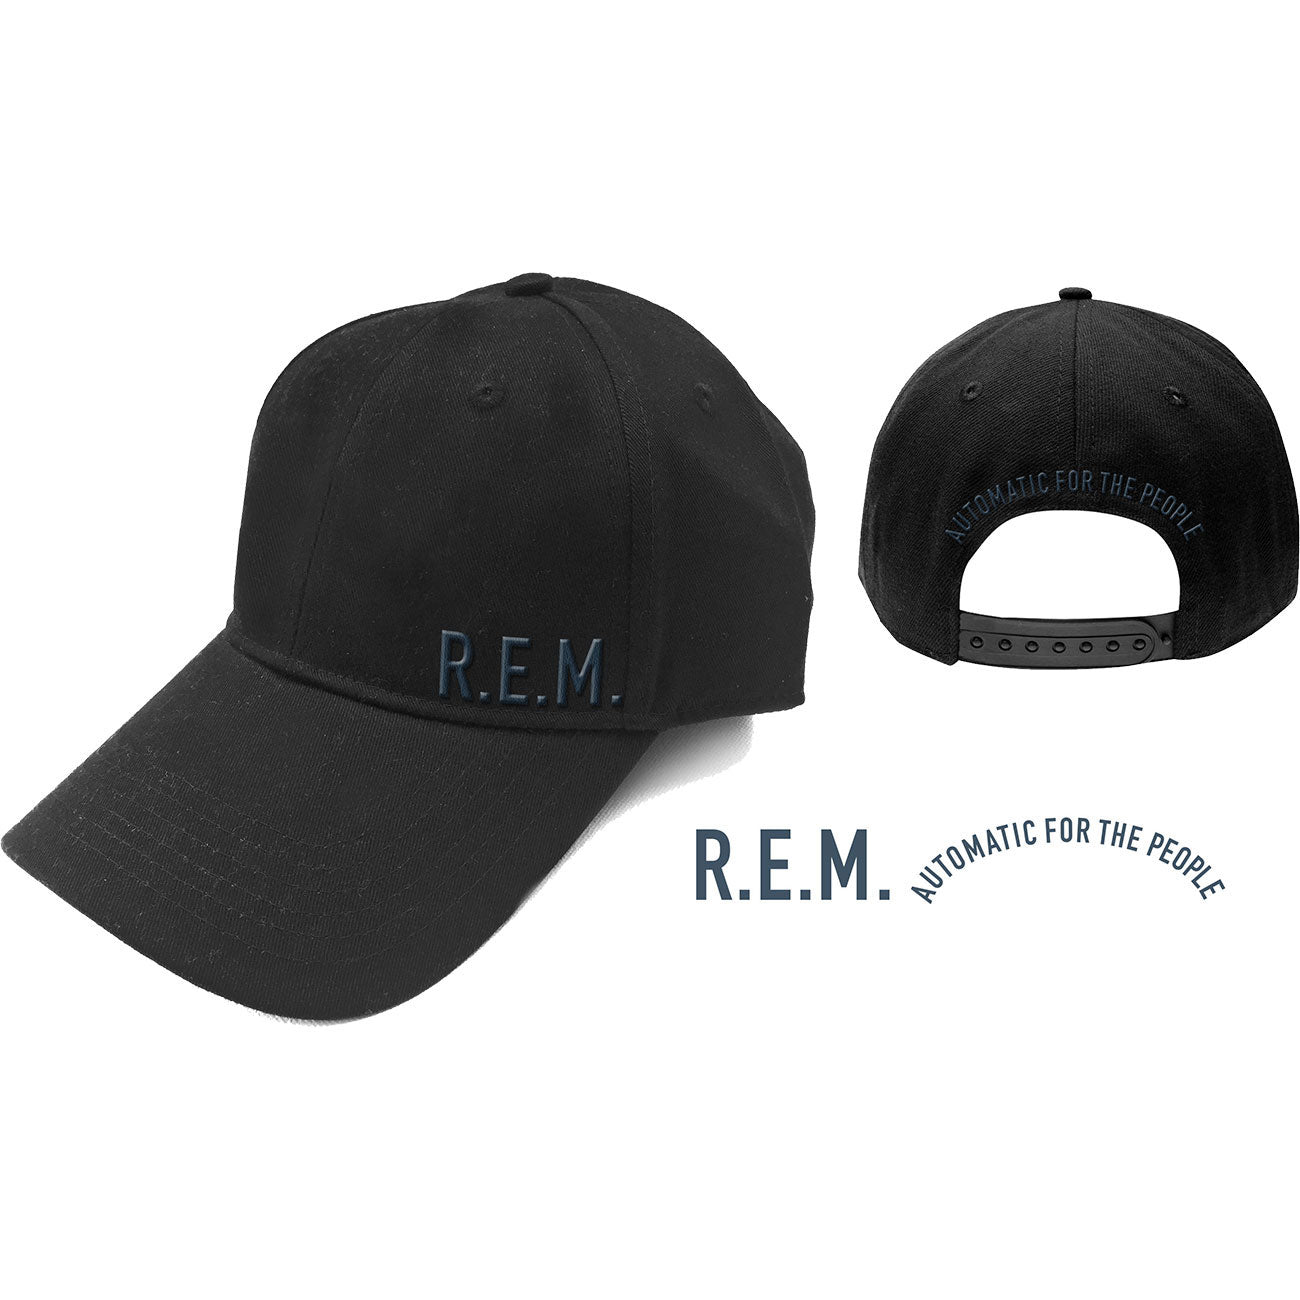 R.E.M. Baseball Cap: Automatic For The People